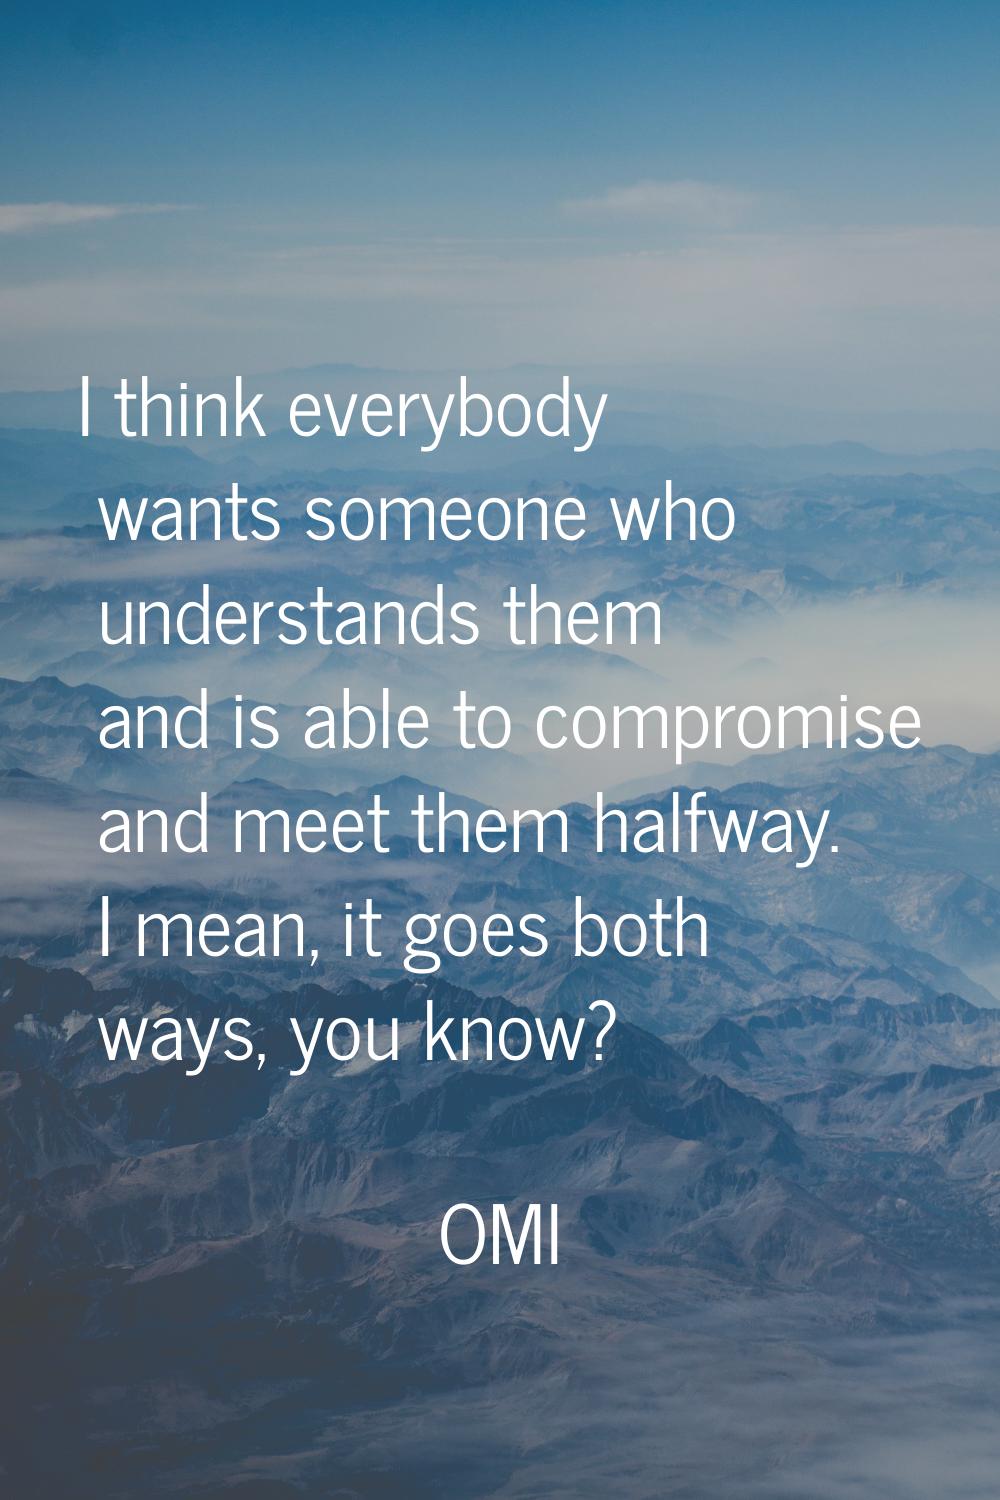 I think everybody wants someone who understands them and is able to compromise and meet them halfwa